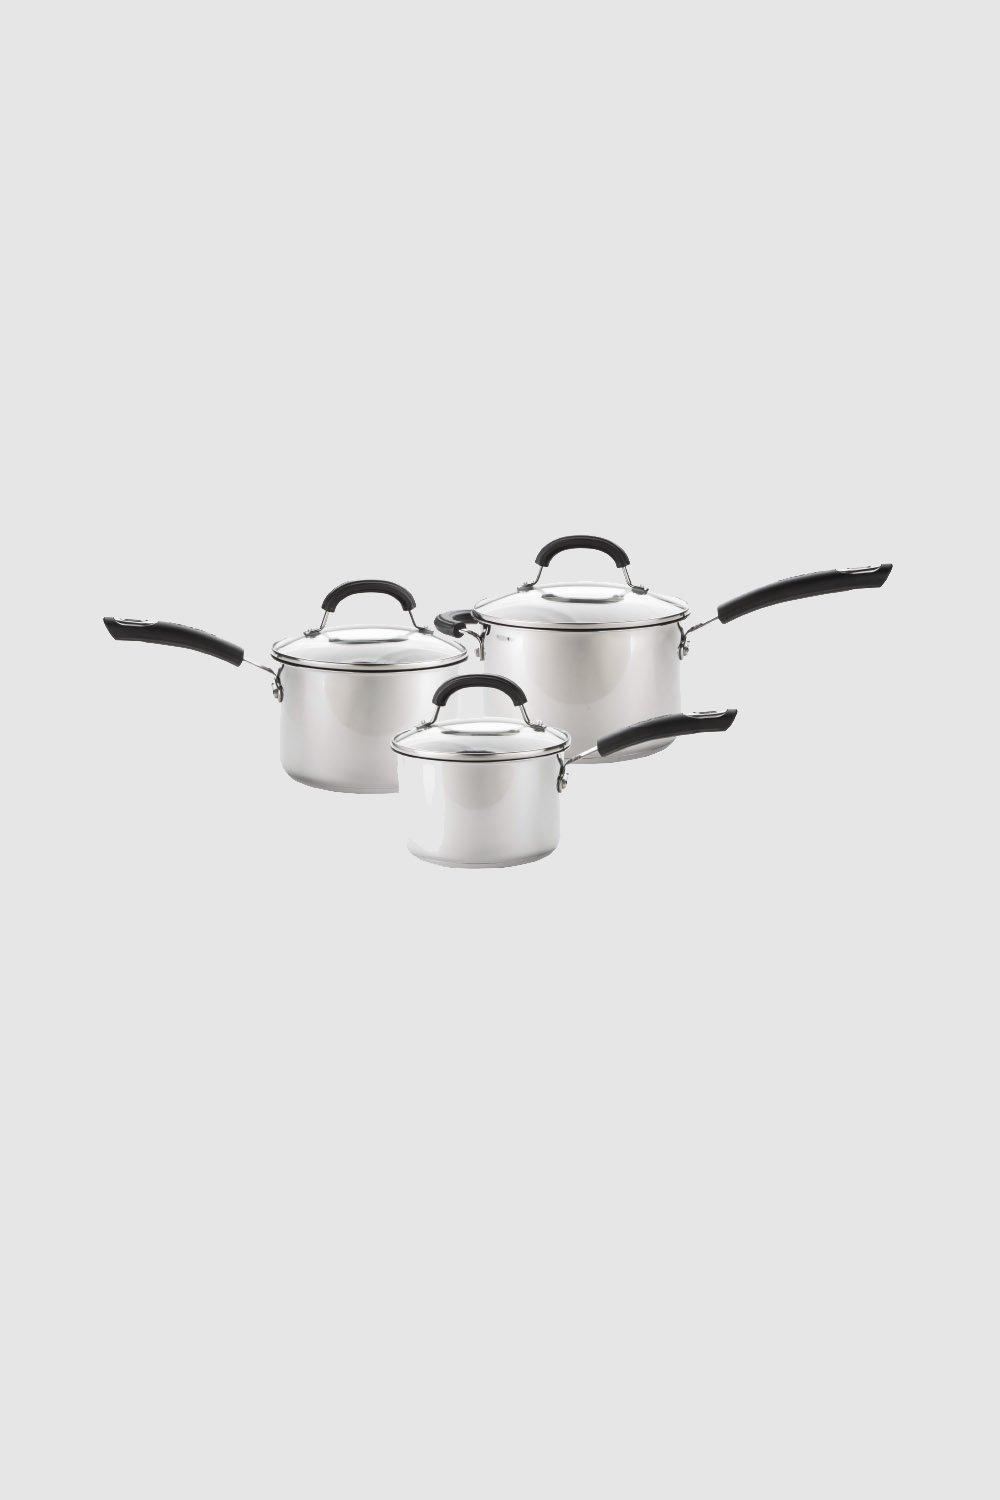 Total Non Stick Saucepan Set Stainless Steel, Induction, Dishwasher Safe, Glass Lids Included